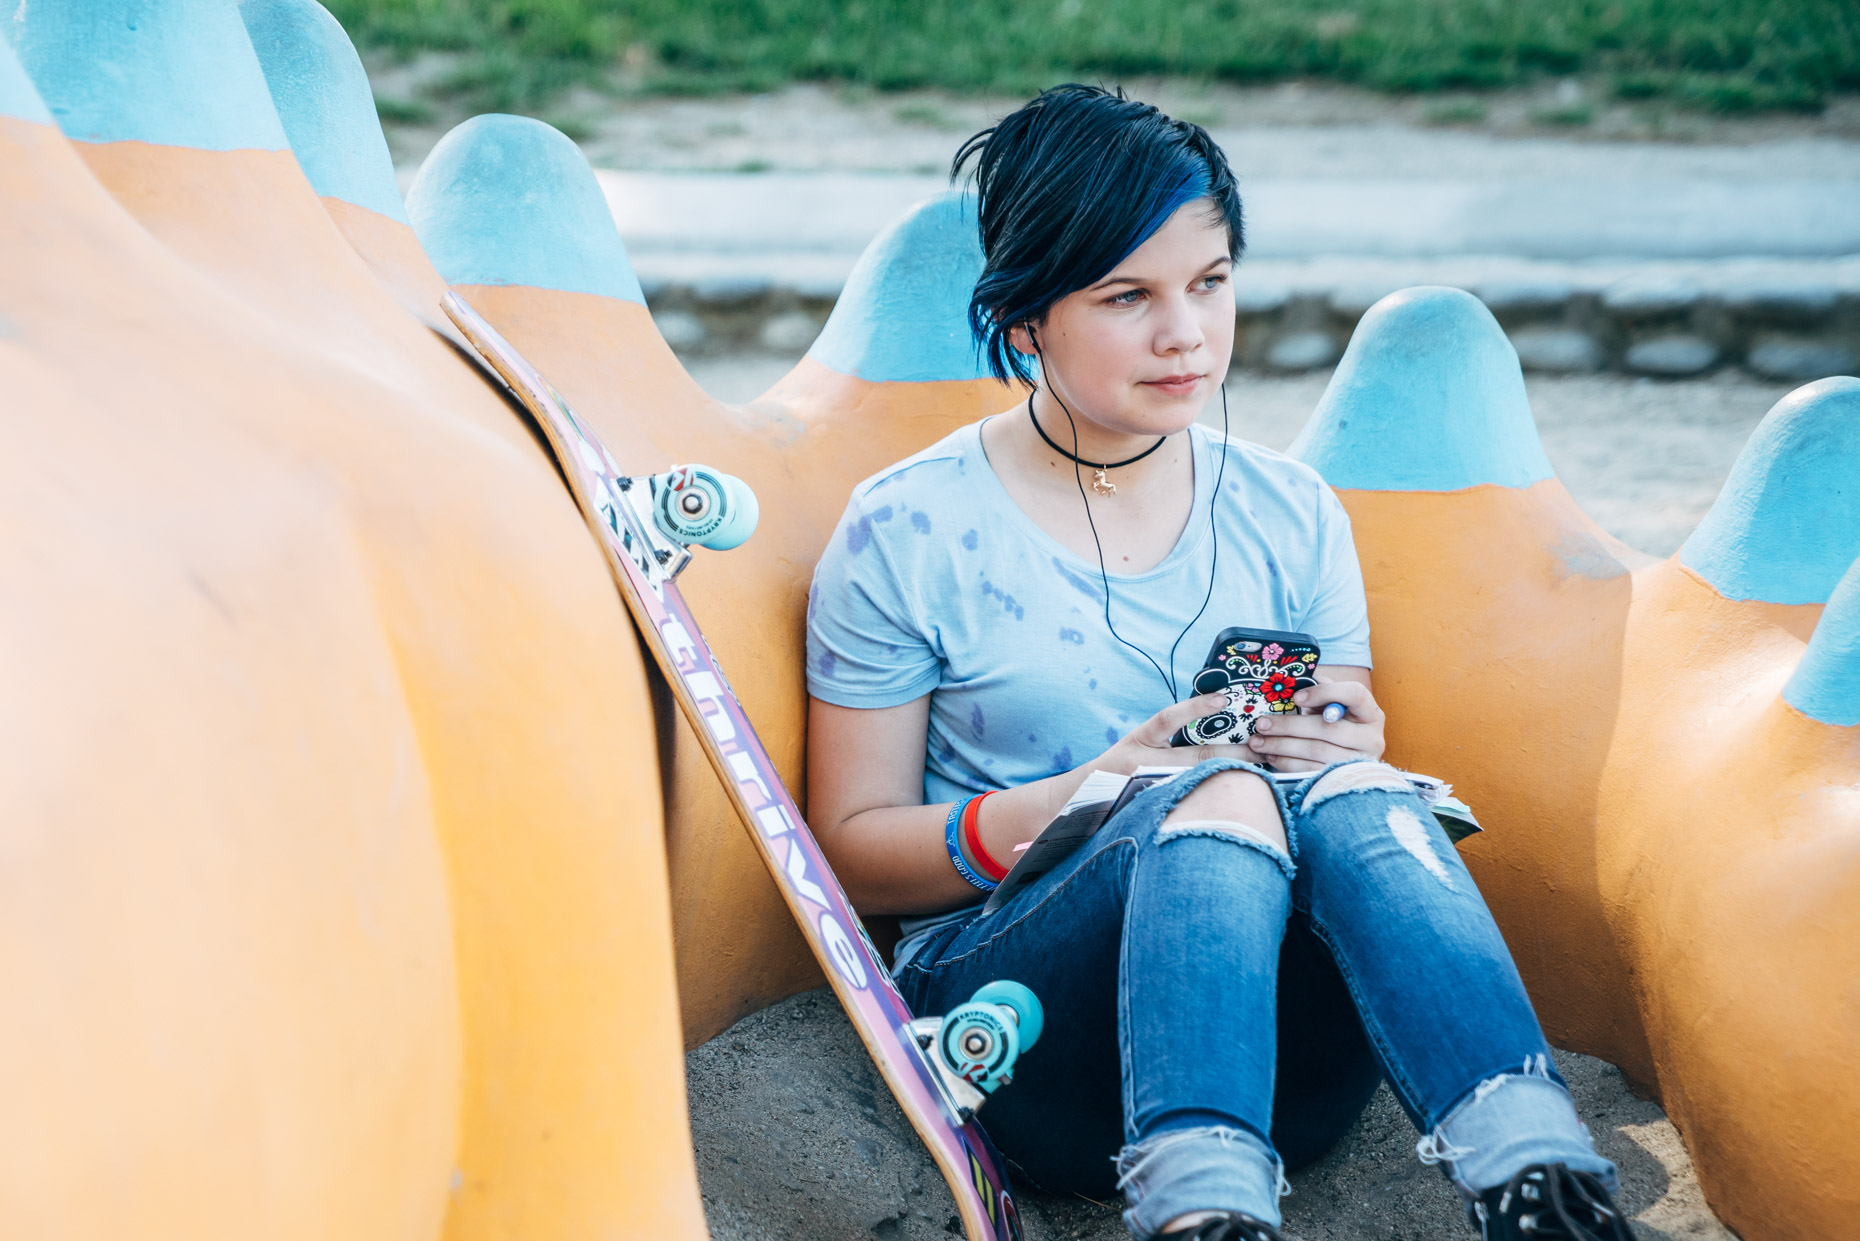 Transgender teen with skate board, cell phone, and headphones sitting in park journaling